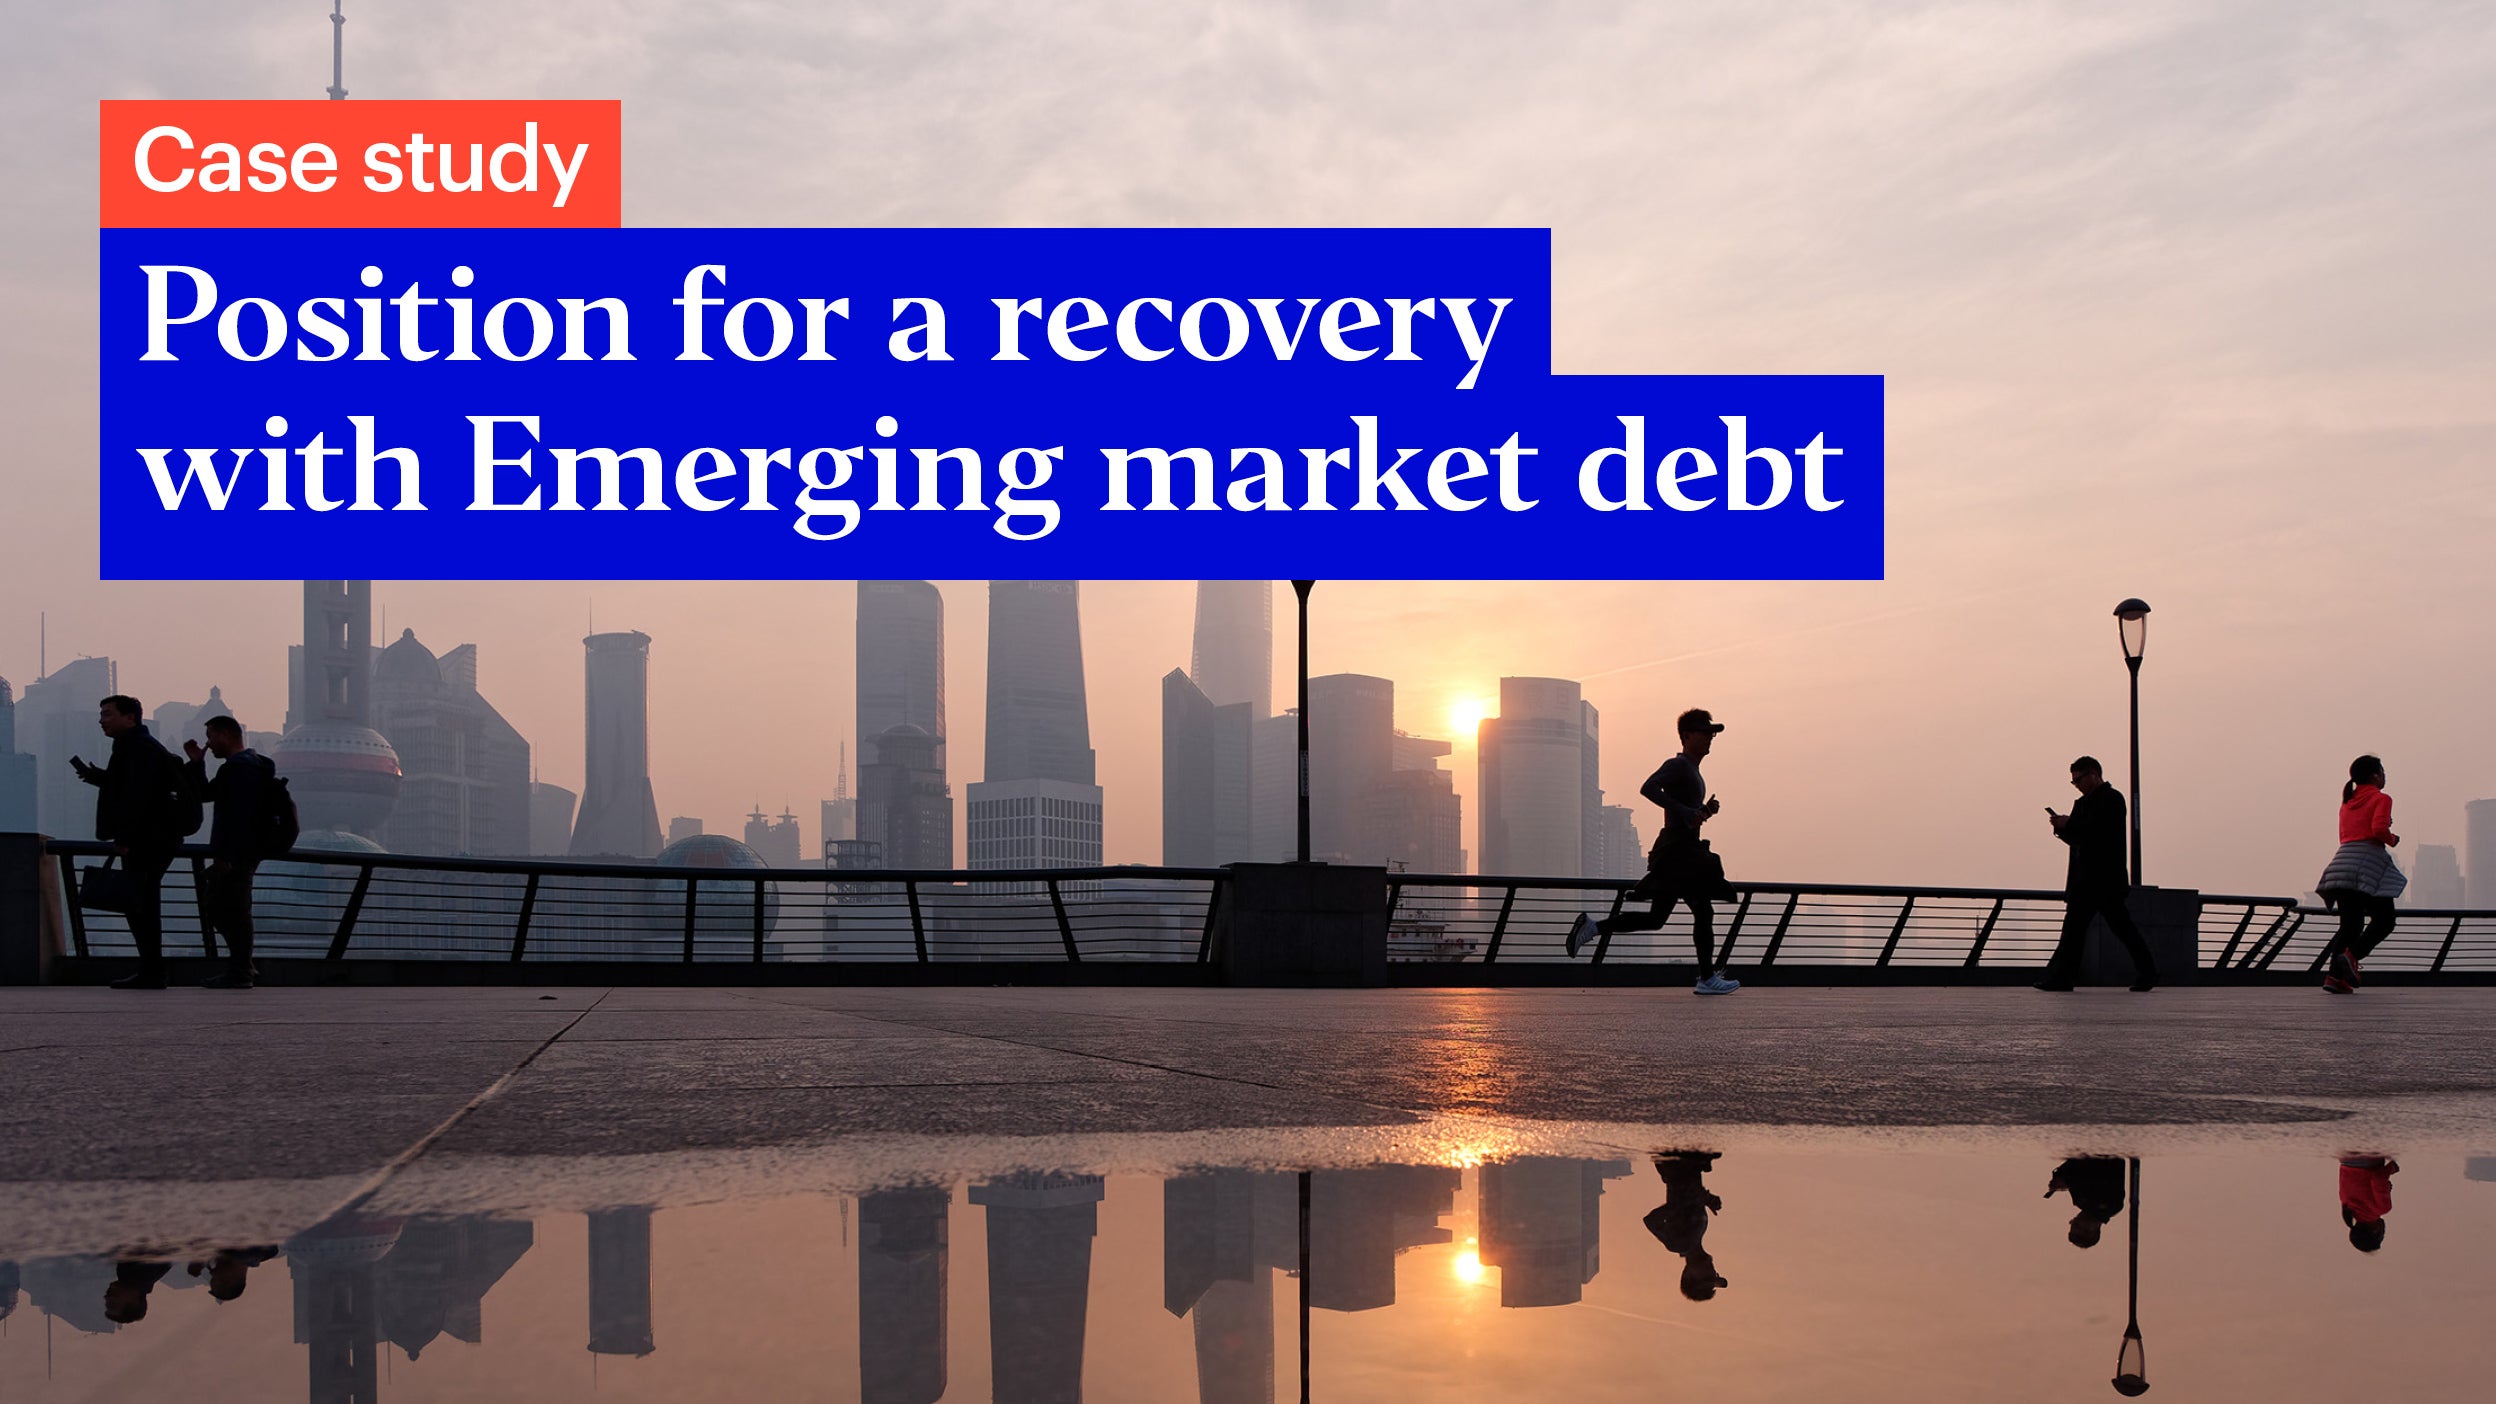 Why consider investing in emerging market local debt?